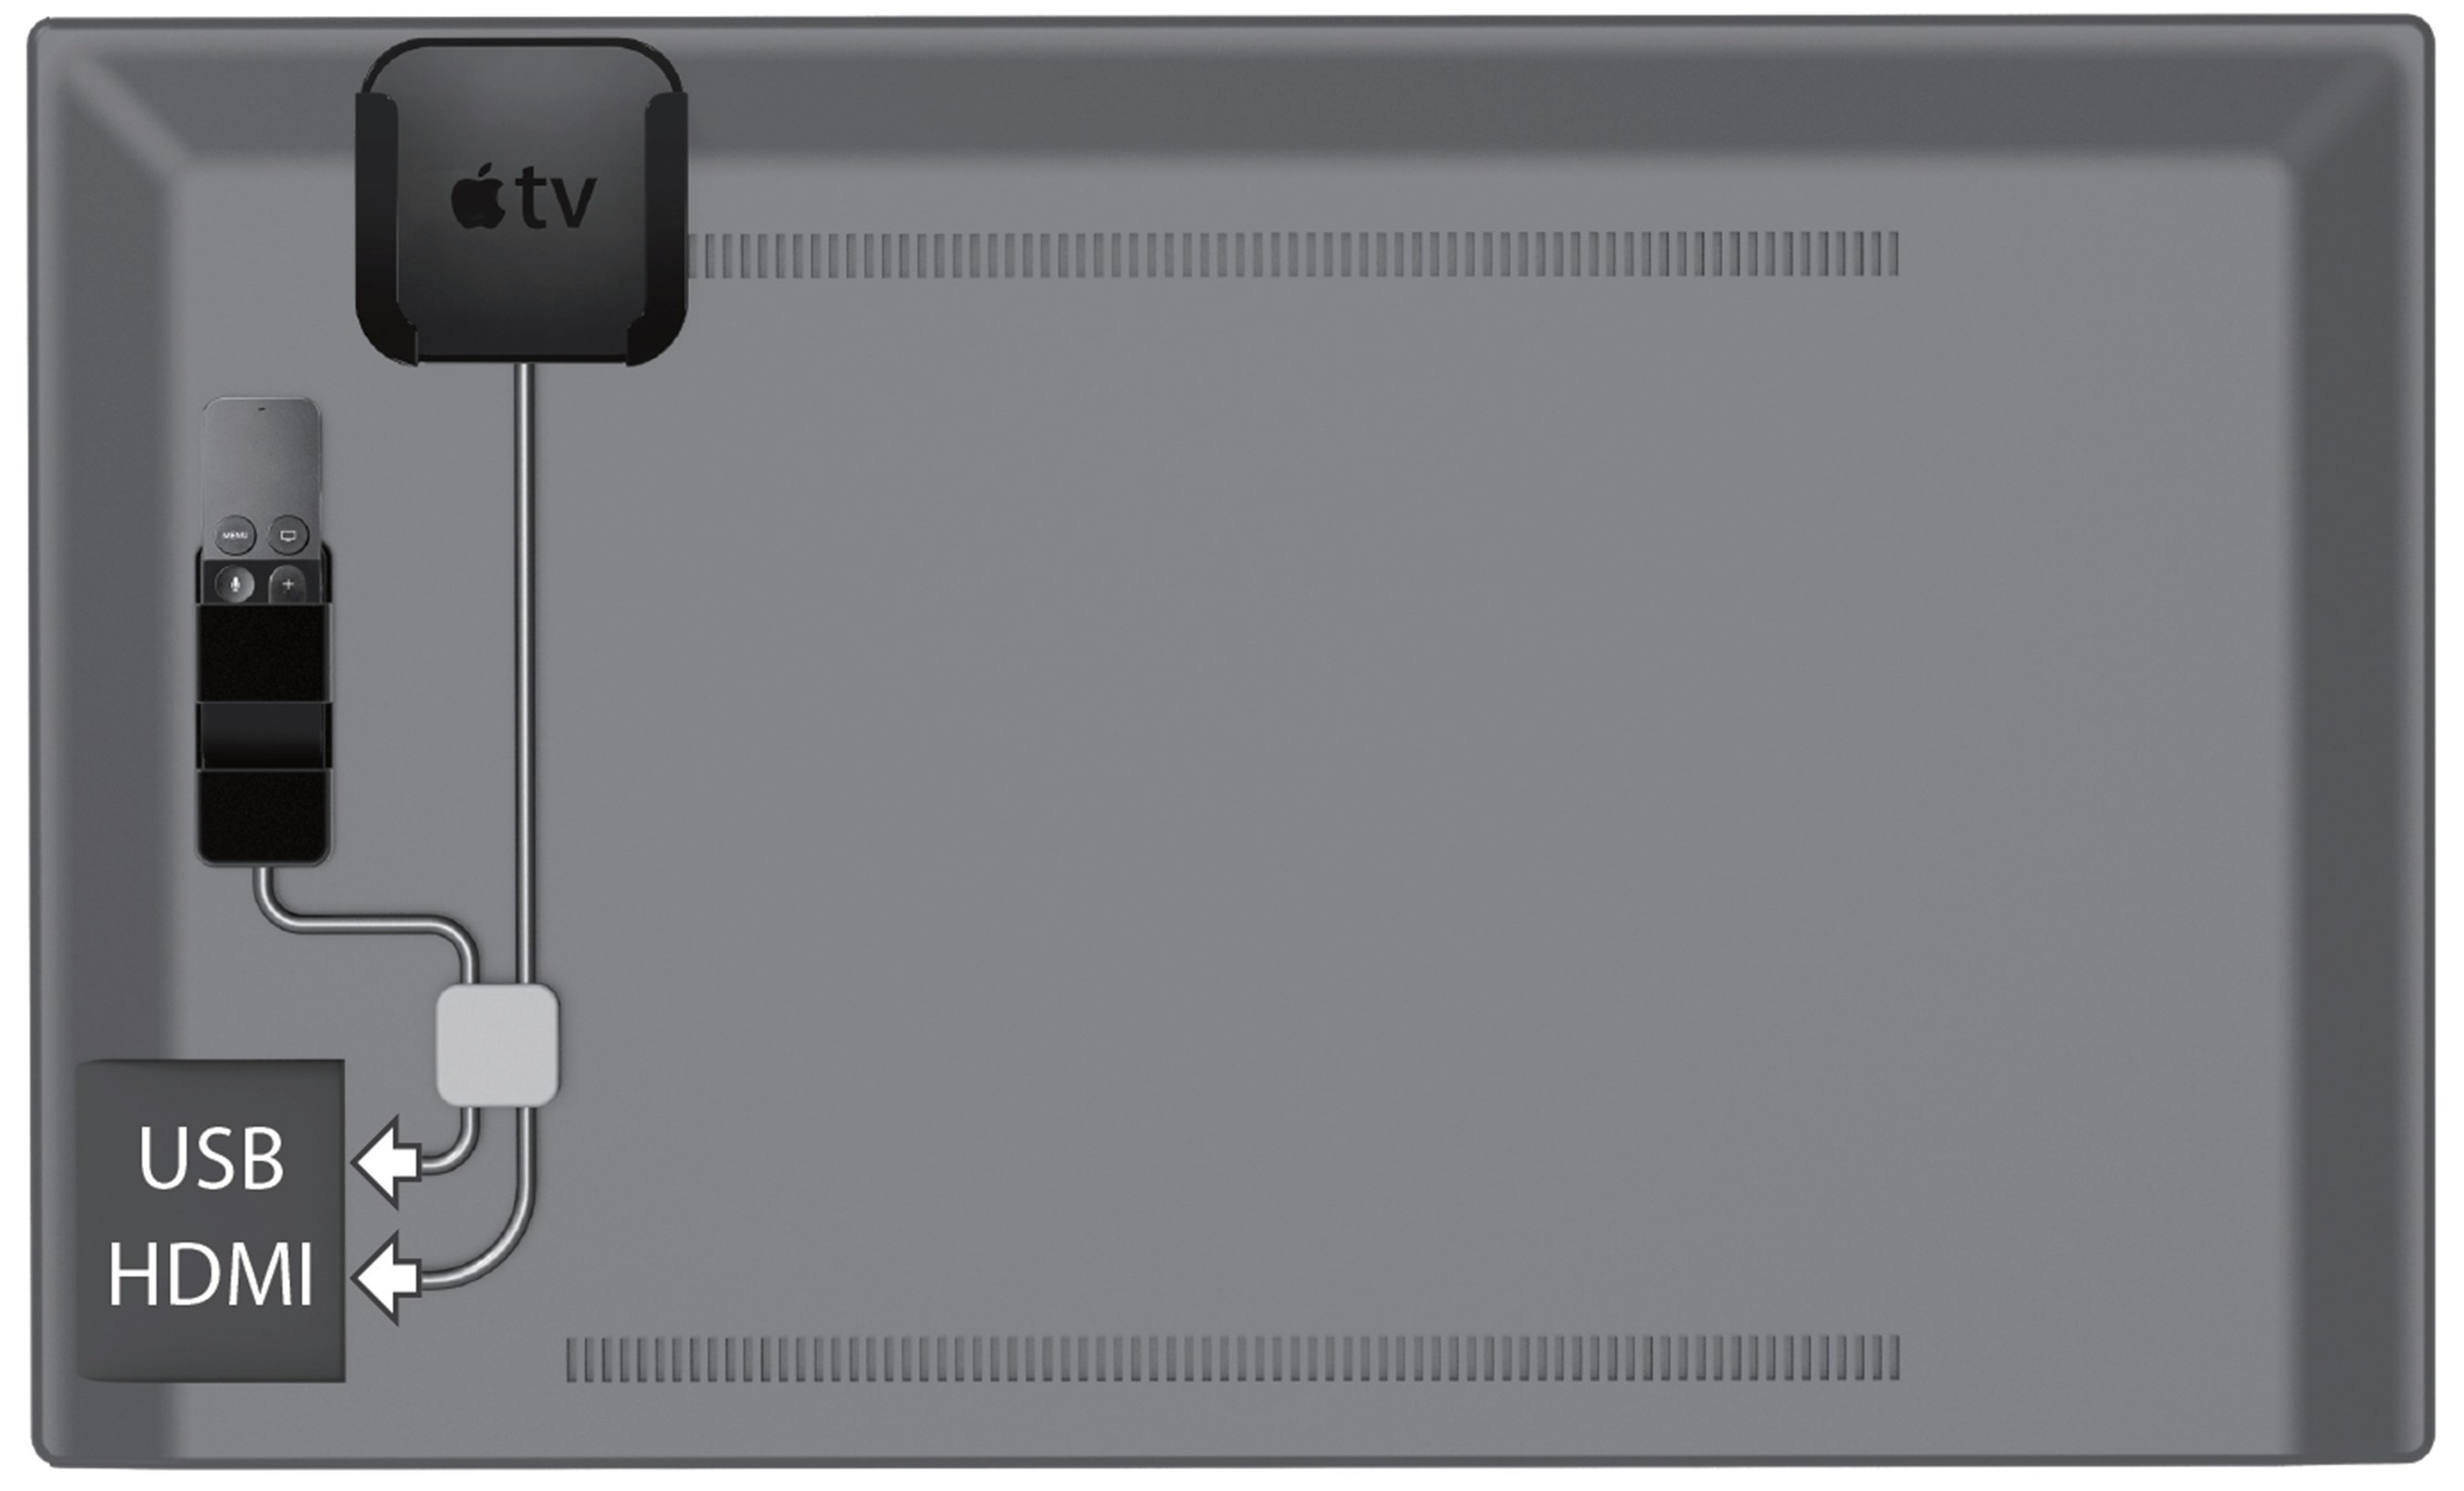 The Apple TV and remote are mounted to the back of a television with TotalMount. The USB and HDMI cables are easily managed using the TotalMount cord management system, which is included in the TotalMount Pro bundle sold in Apple stores worldwide.